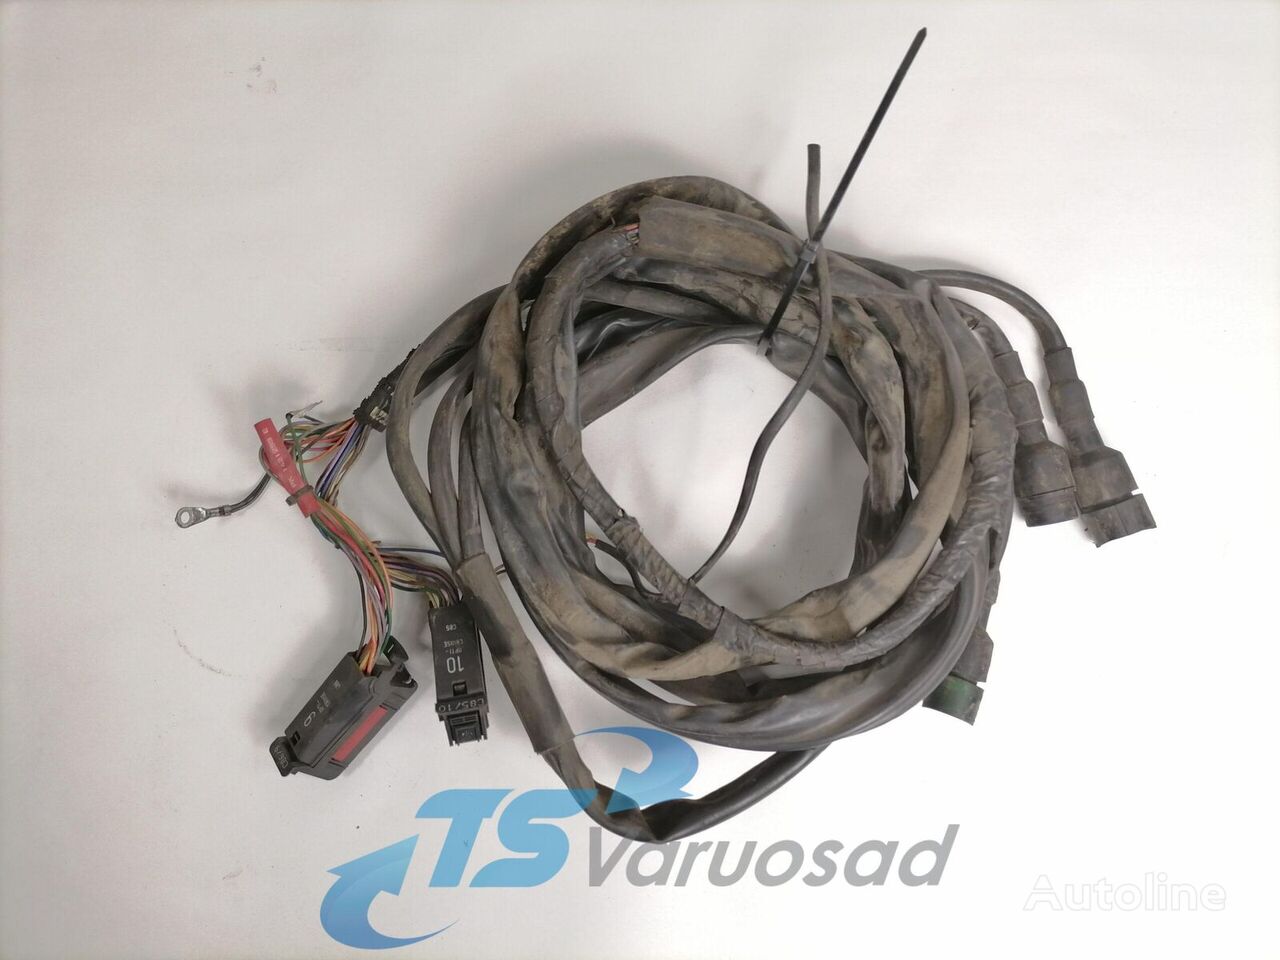 Scania 124 トラクタートラックのためのScania gearbox cable 1421299 配線